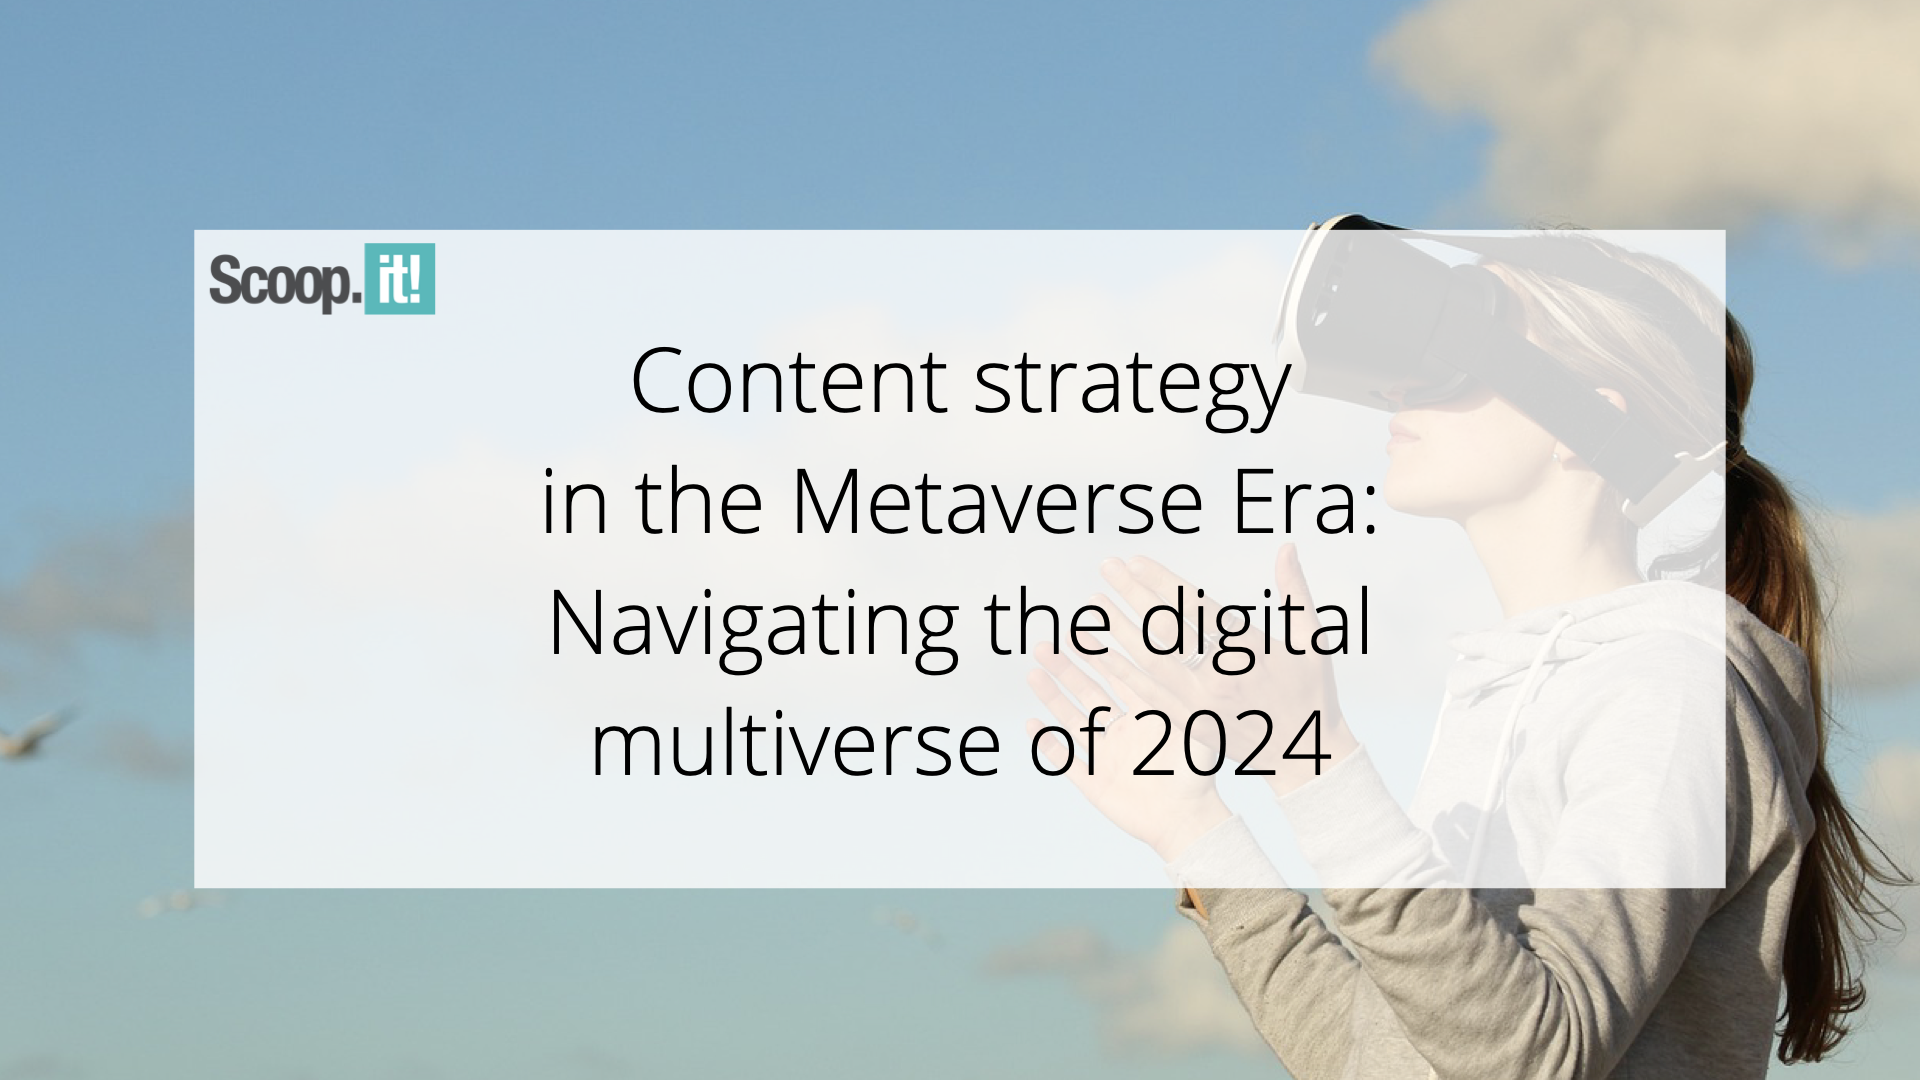 content-strategy-in-the-metaverse-era:-navigating-the-digital-multiverse-of-2024-–-scoop.it-blog